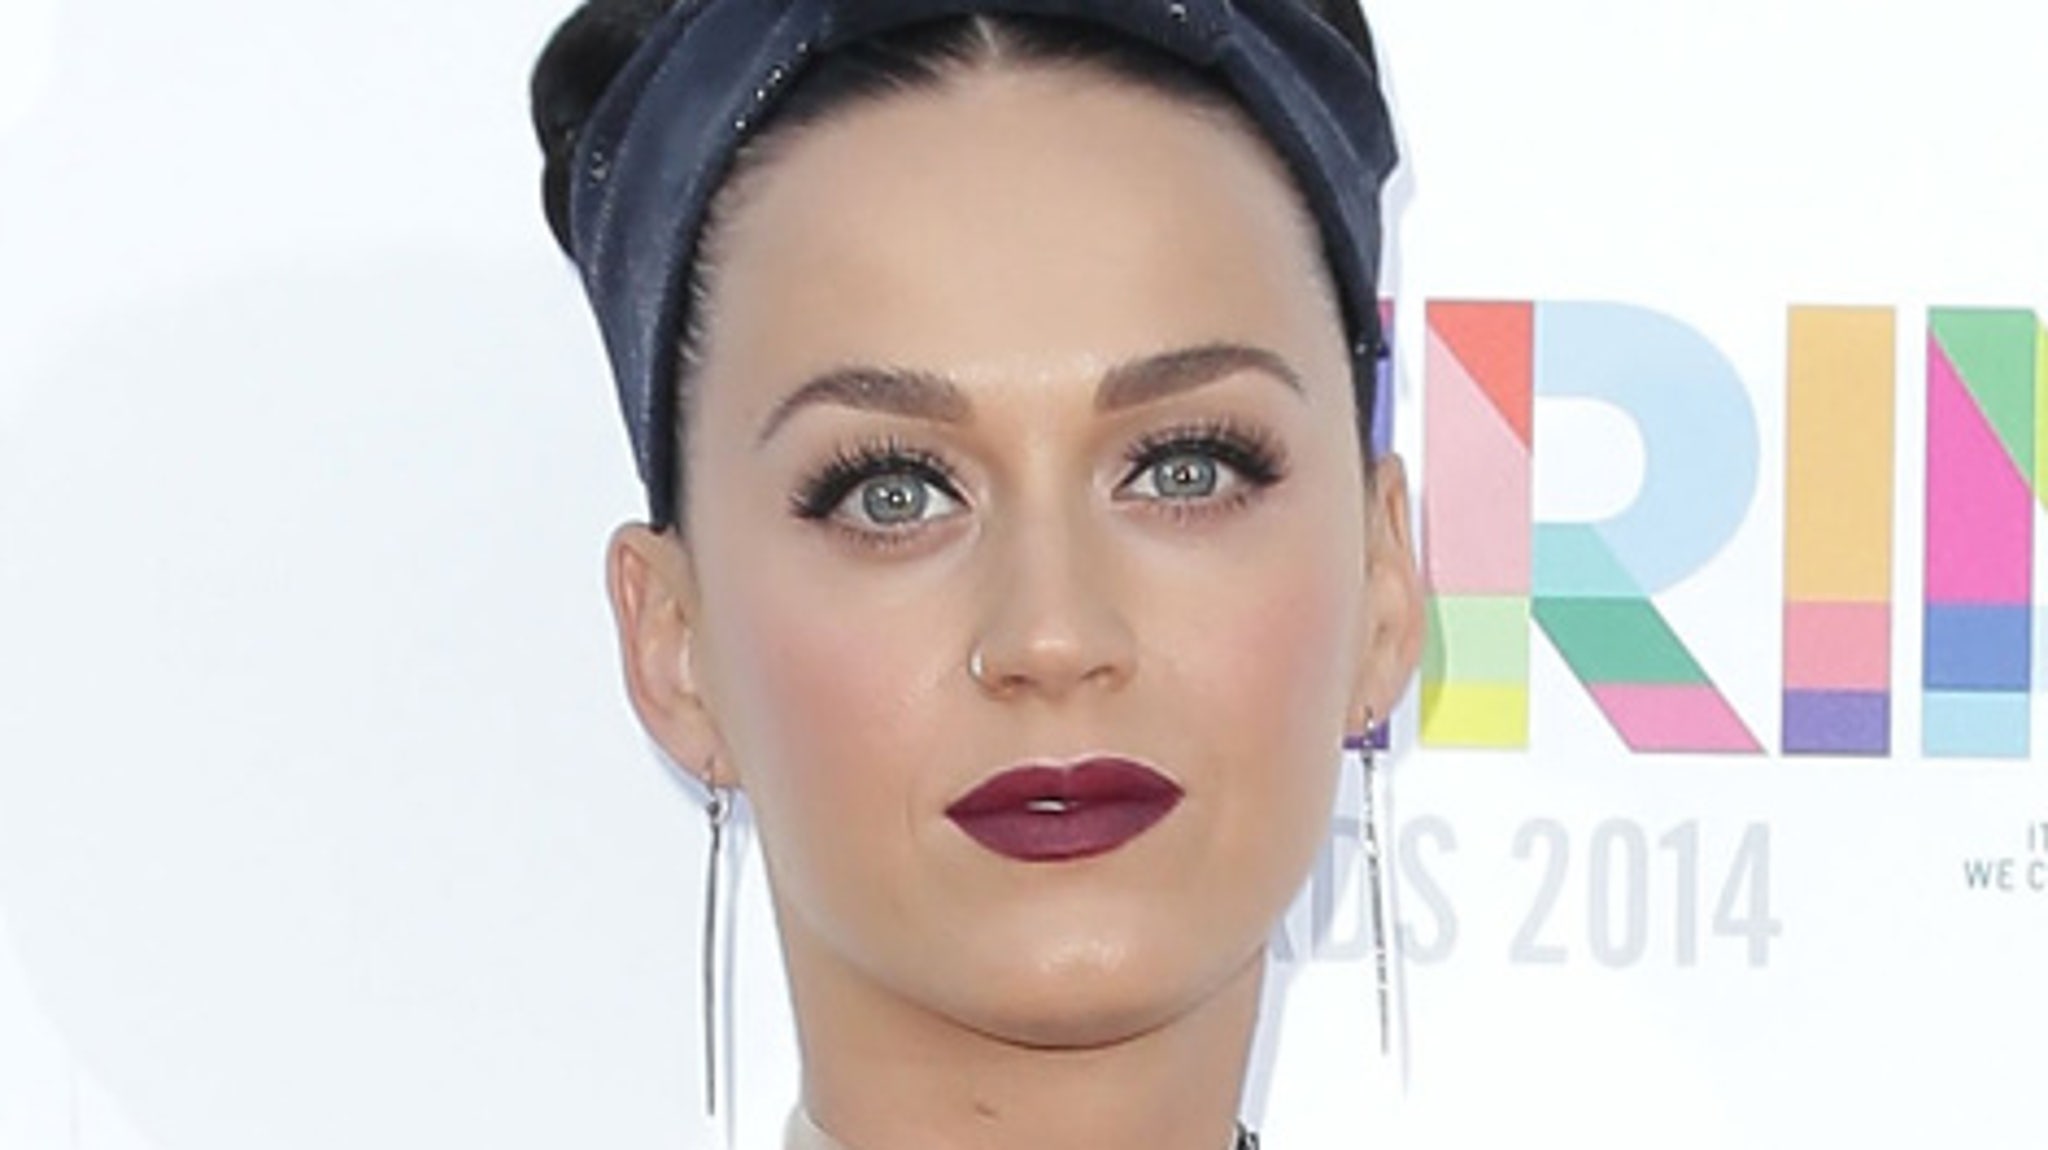 Katy Perry Preps for Super Bowl With Football-Themed Pedicure